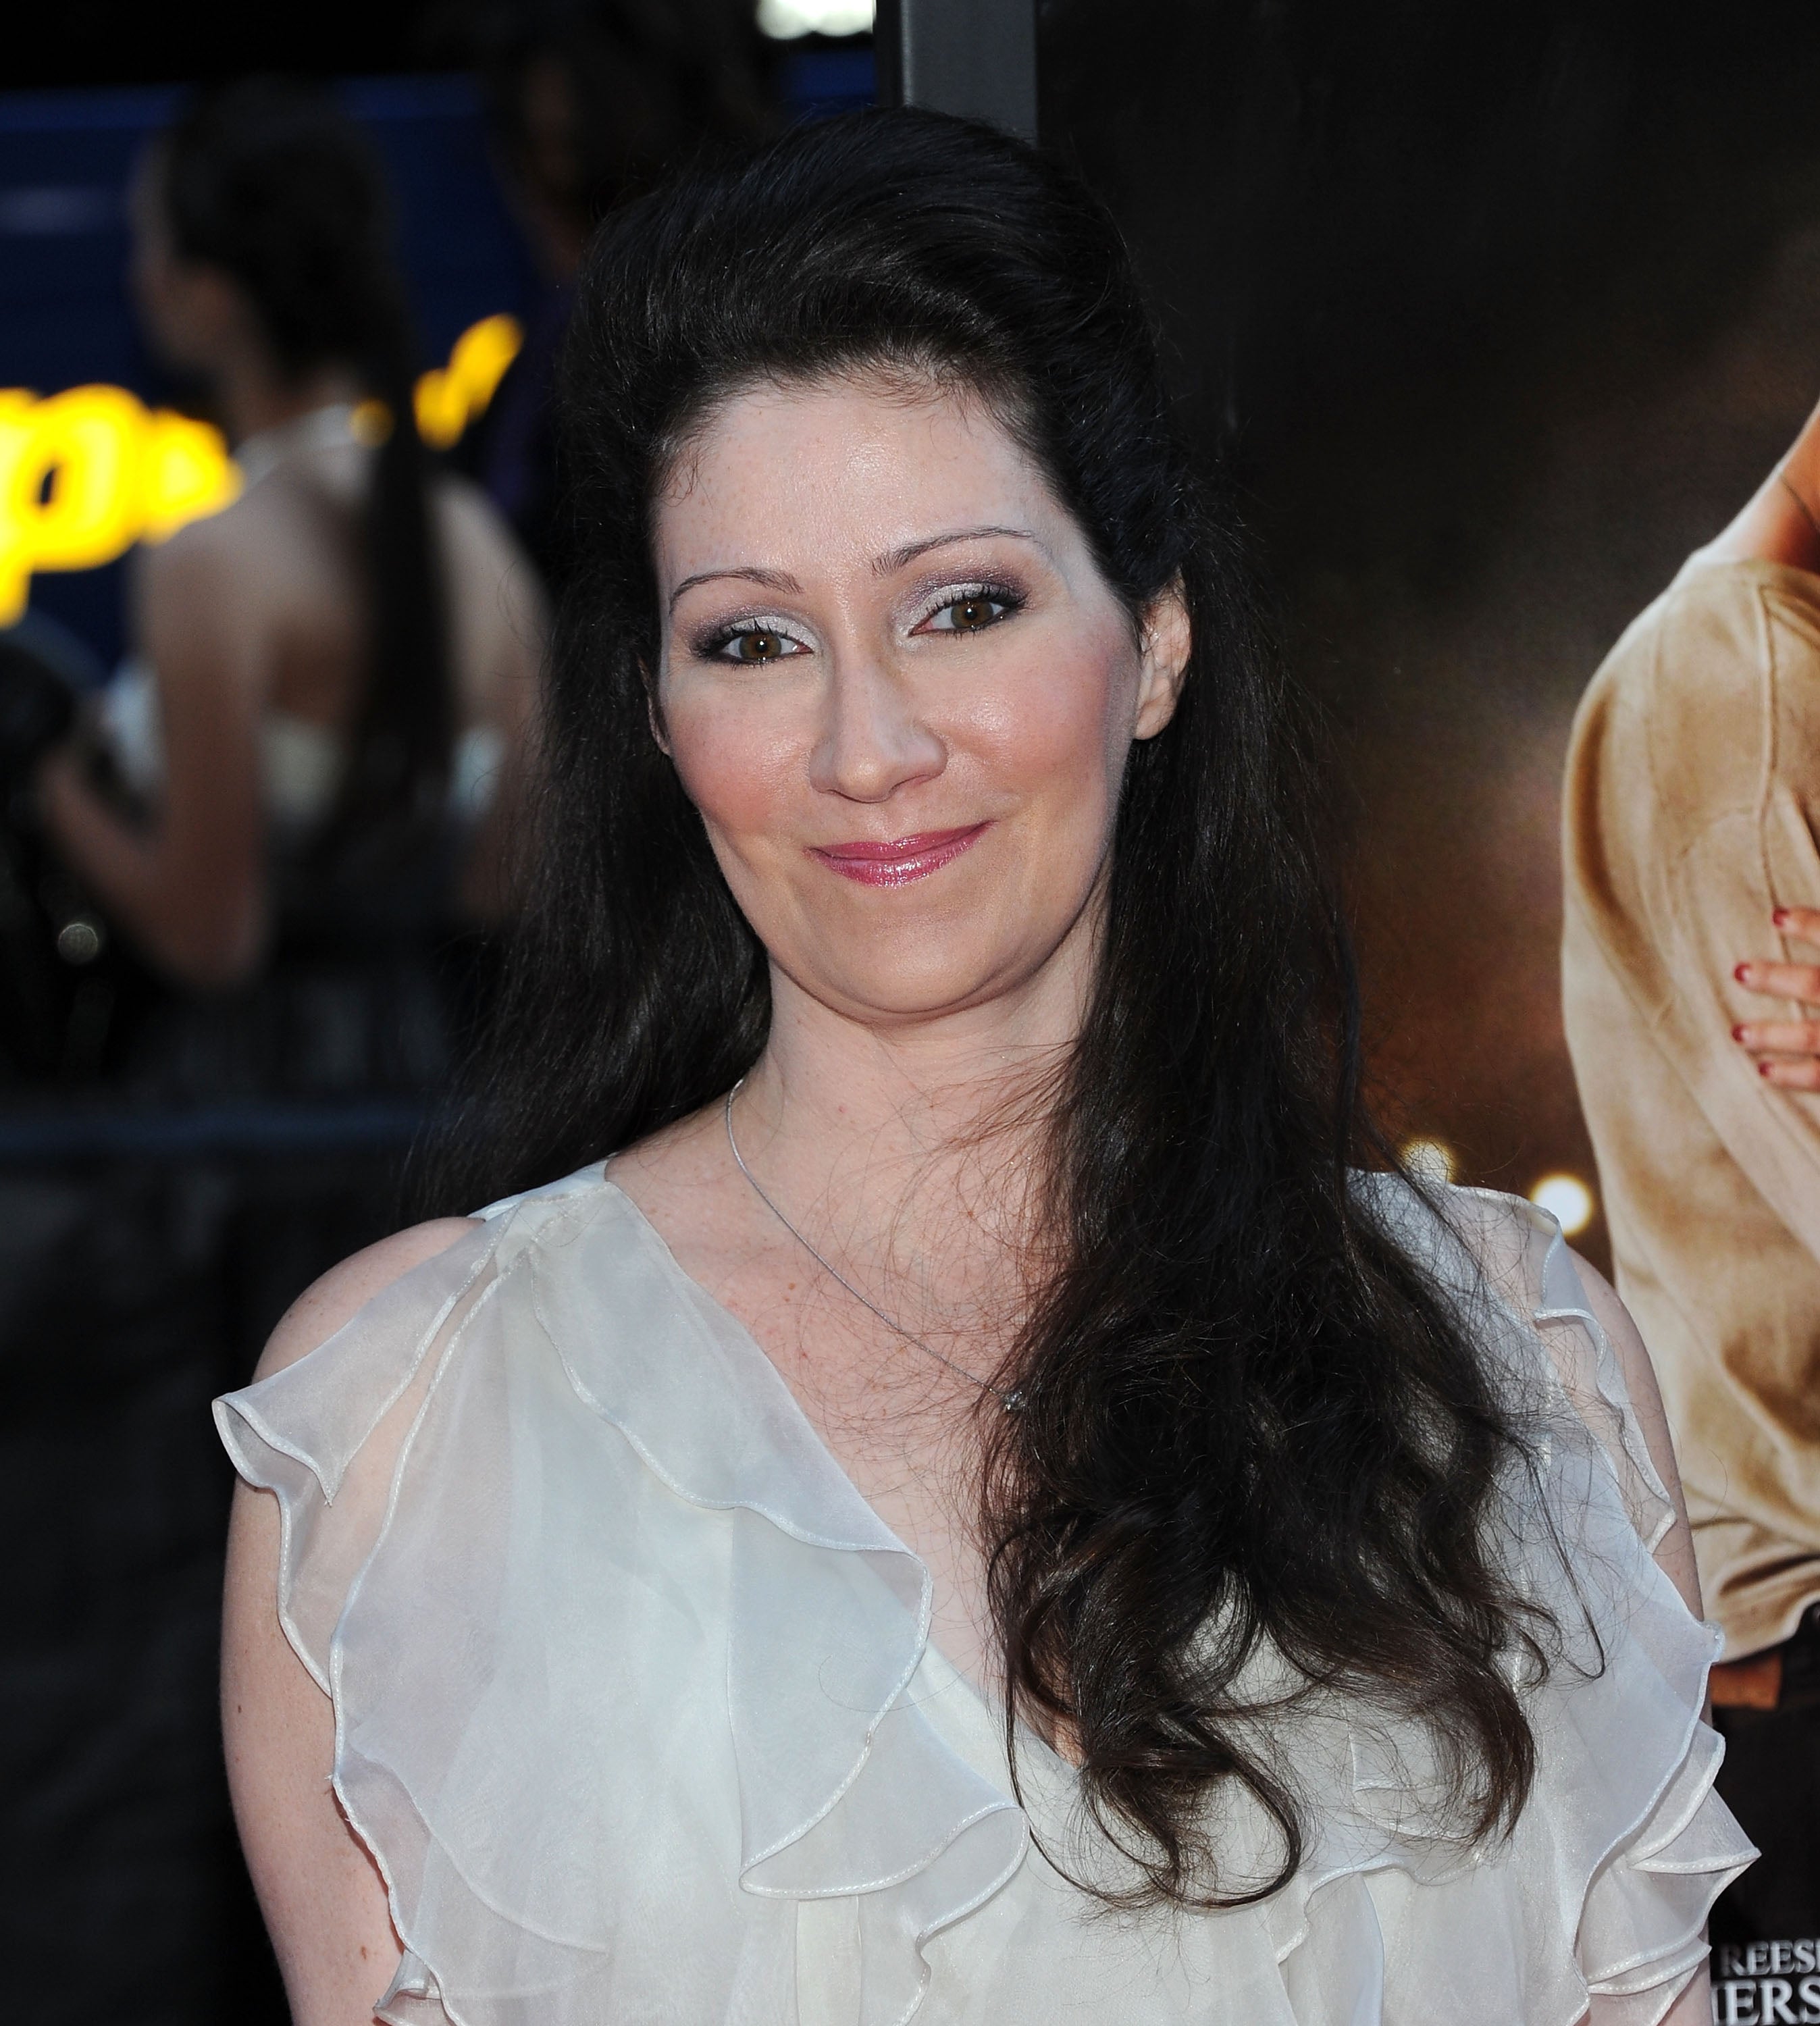 Author Sara Gruen attends the ‘Water For Elephants’ premiere at the Ziegfeld Theatre on 17 April, 2011